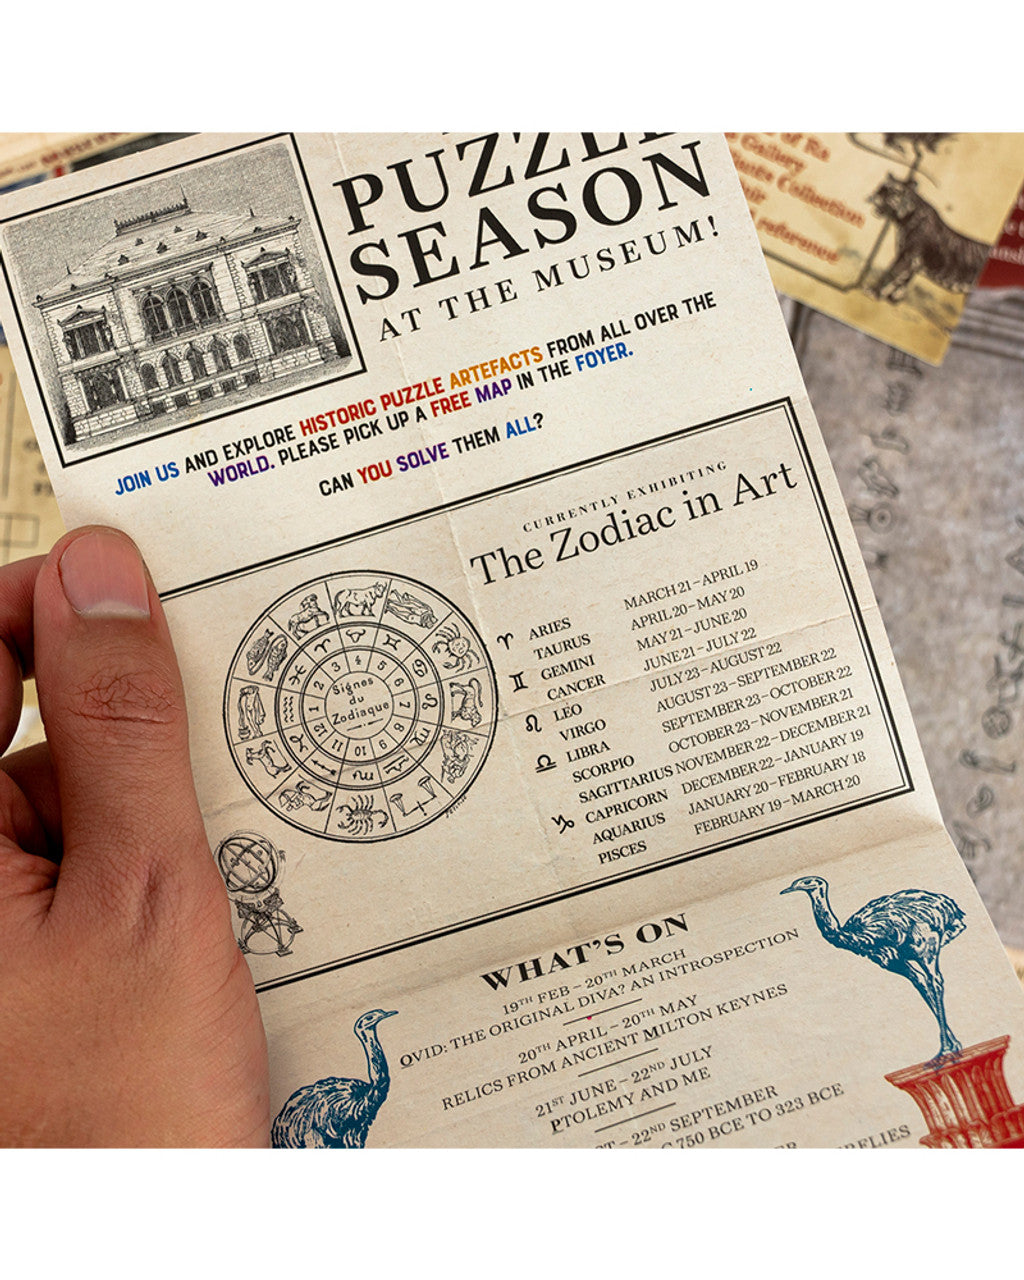 Escape from The Museum Puzzle